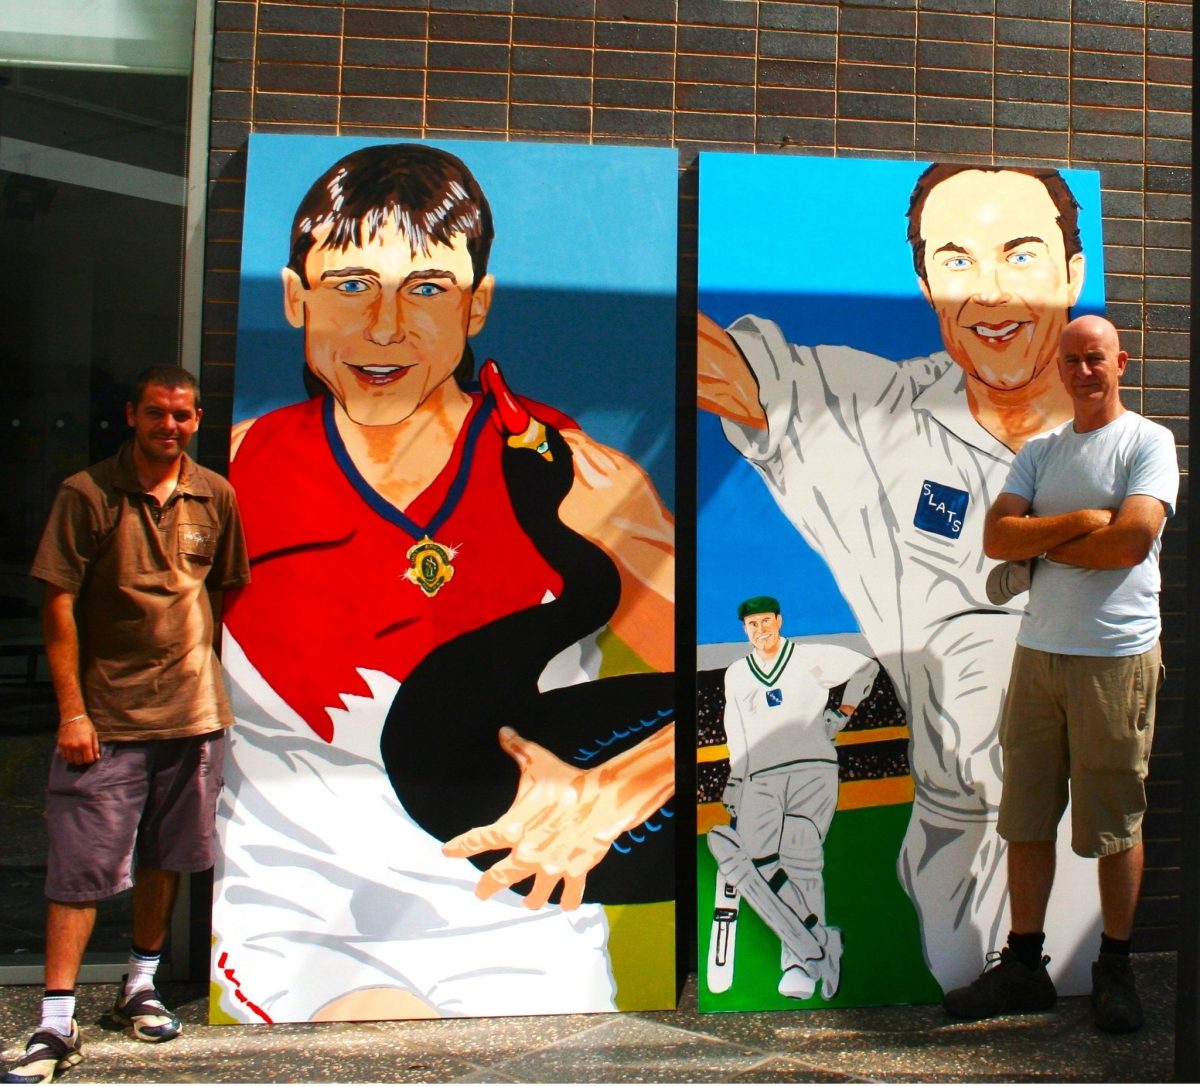 Melbourne artist Tony Sowersby (right) painted the popular murals in 2008. 